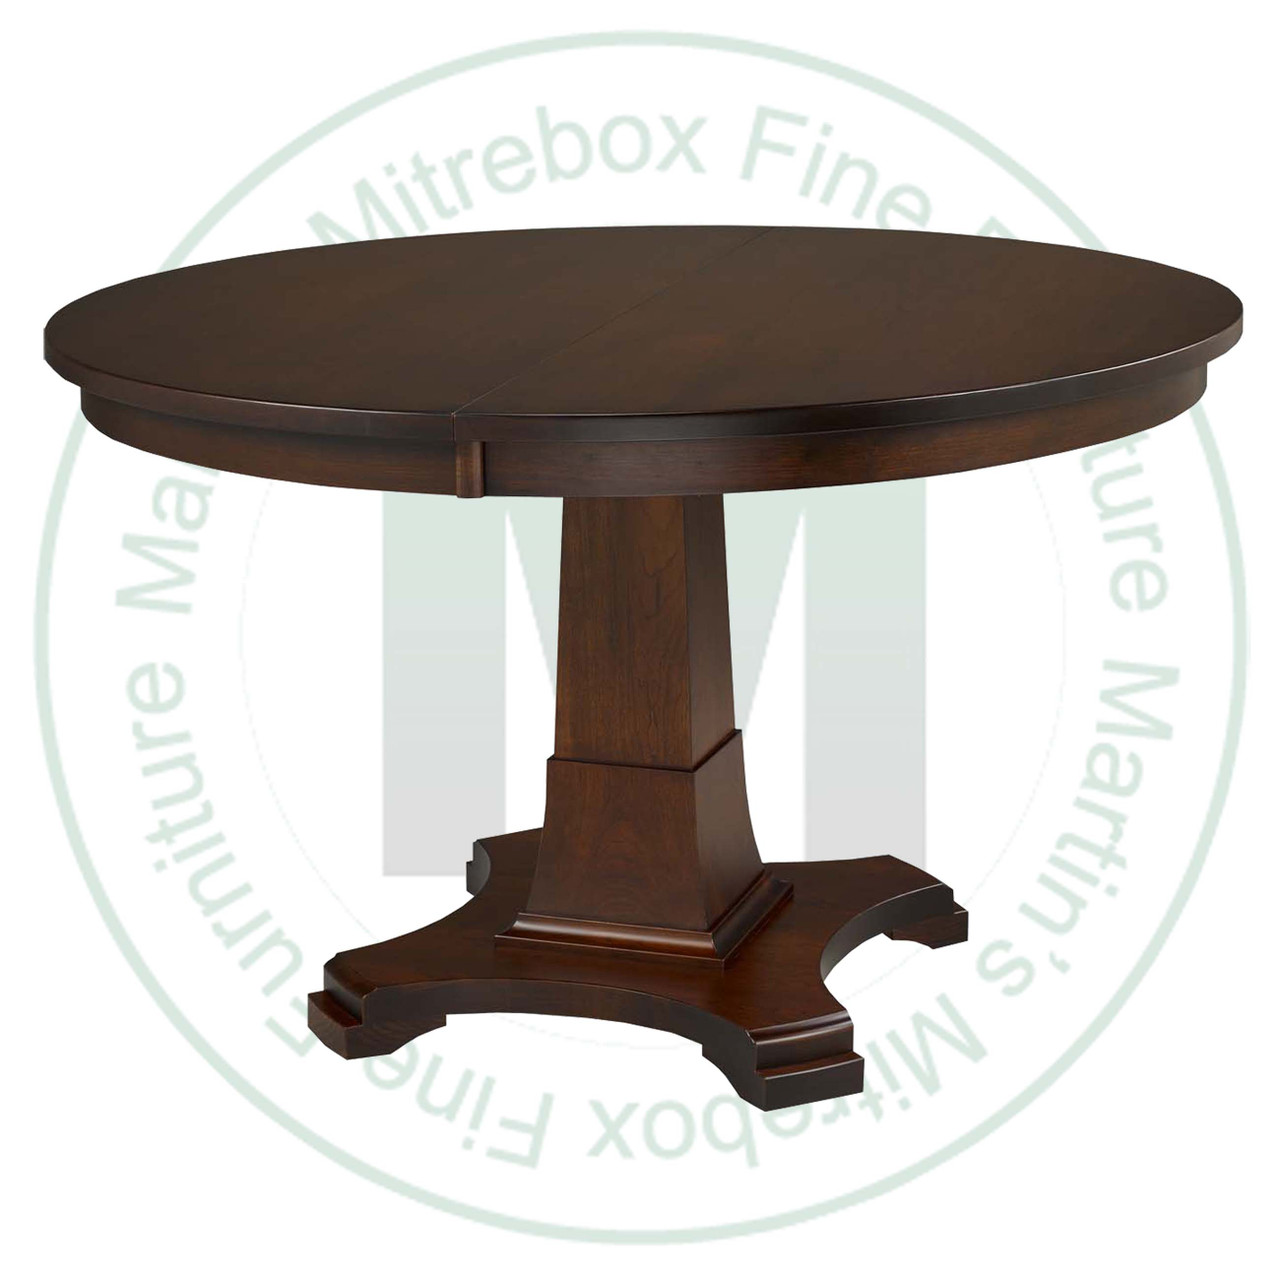 Wormy Maple Abbey Single Pedestal Table 36''D x 42''W x 30''H With 1 - 12'' Leaf. Table Has 1'' Thick Top